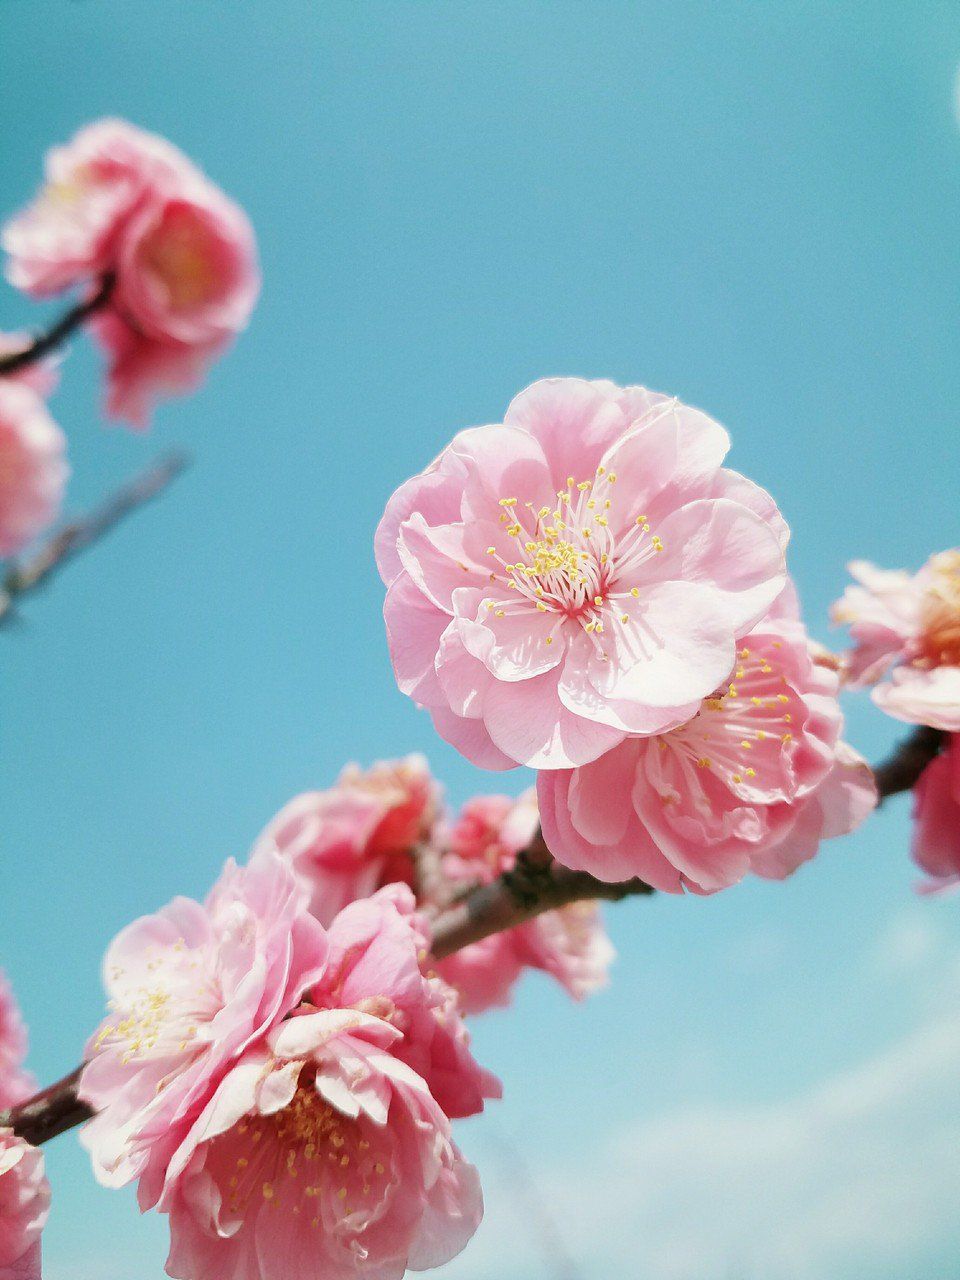 Wallpaper Covers Wallpaper & Videos blossom flowers. ✨ Follow us for more image ✨ Instagram : Facebook Web : #Nature # flower #Flowers #cherryblossom #Nature